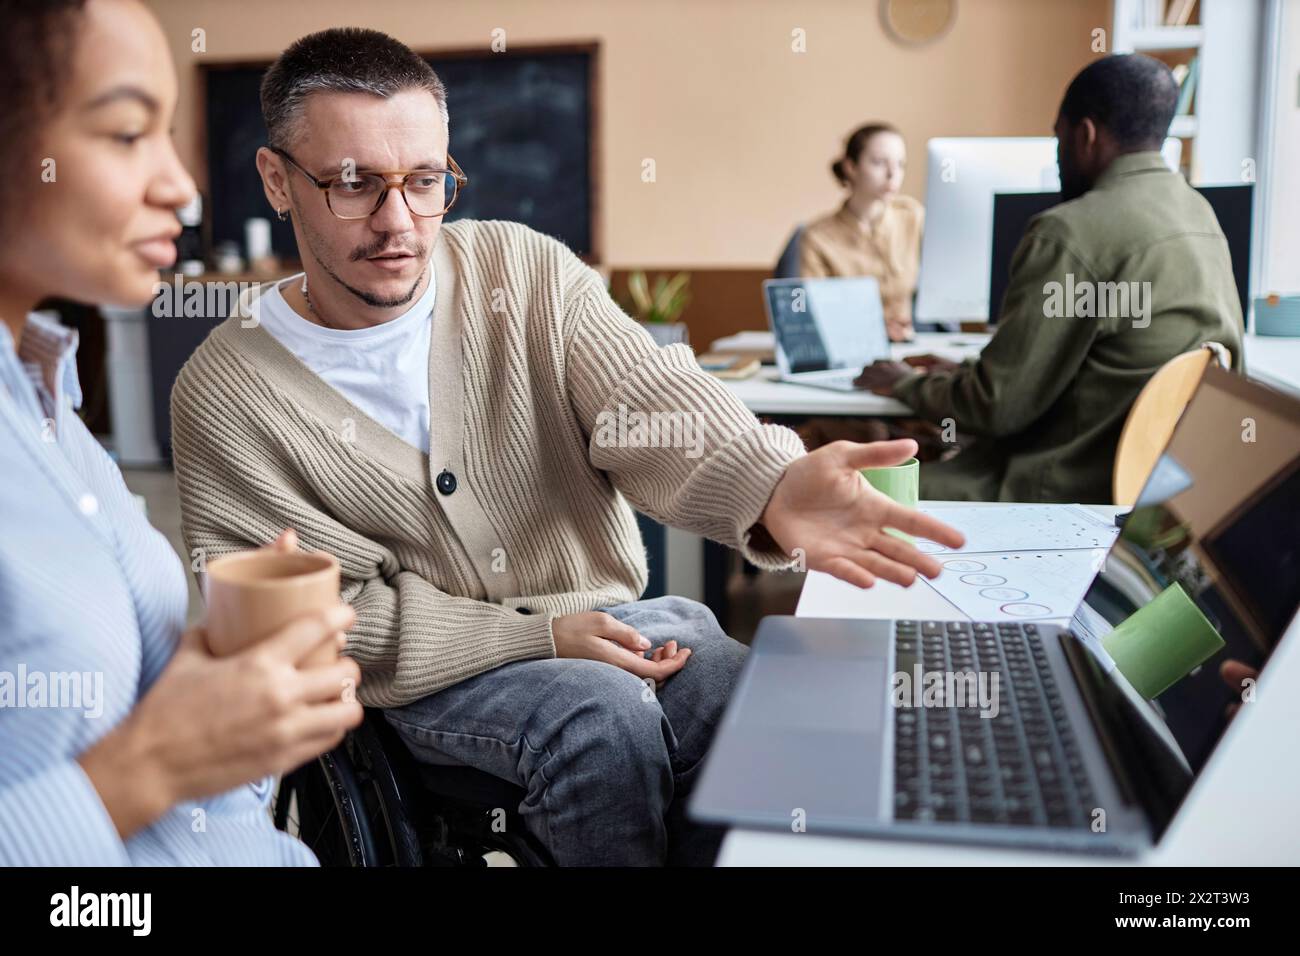 Businessman with disability having discussion over new computer software on laptop with businesswoman at desk Stock Photo